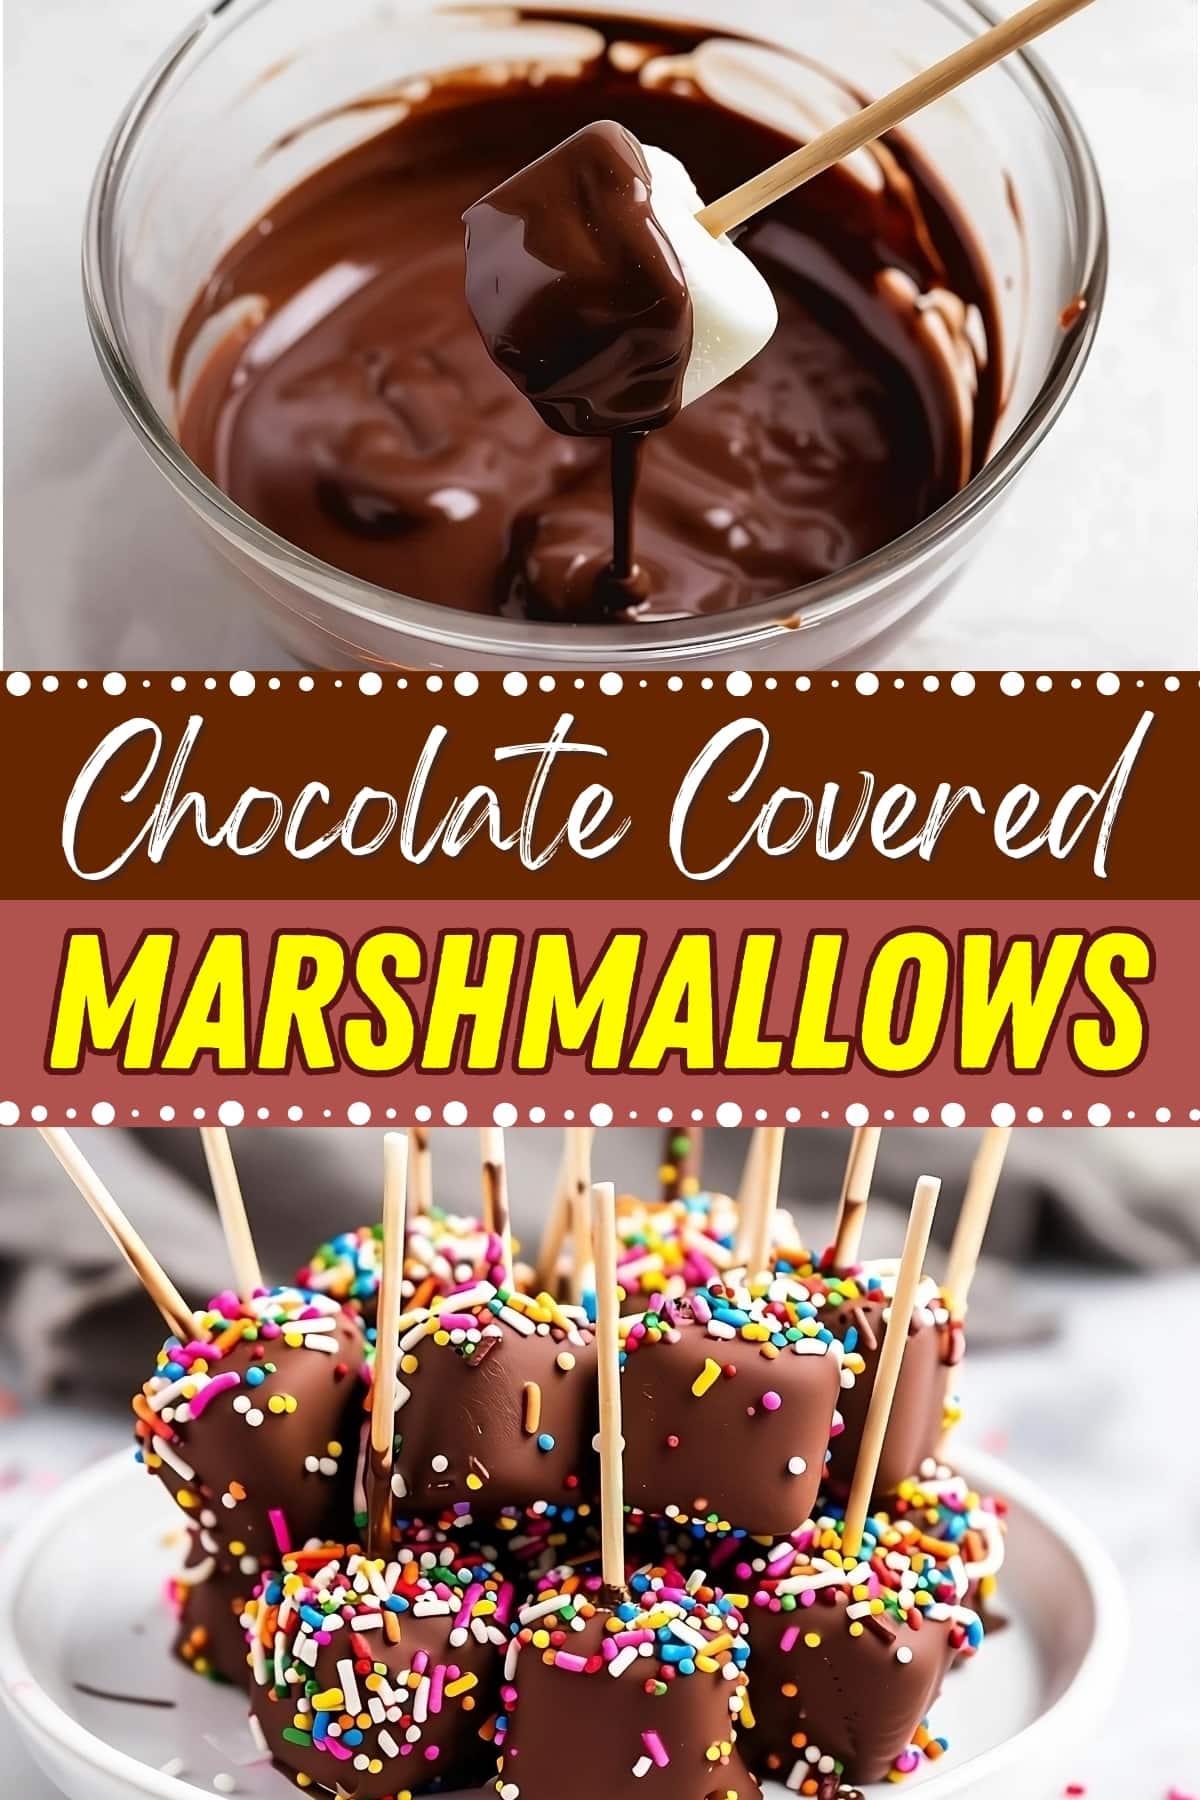 Chocolate covered marshmallows.